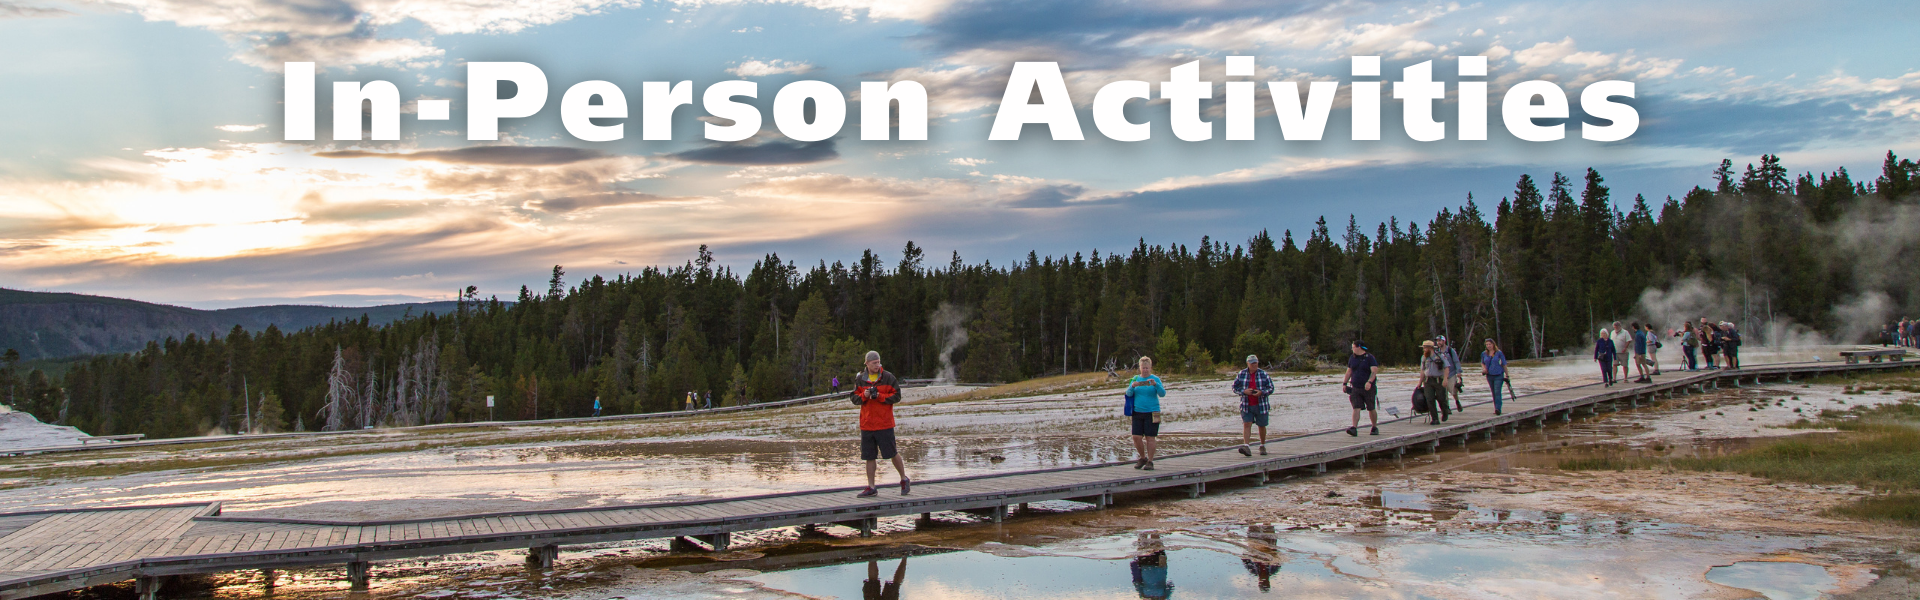 Section Header: people walking on a boardwalk above a colorful thermal feature at sunset with overlaying text, "In-Person Activities"